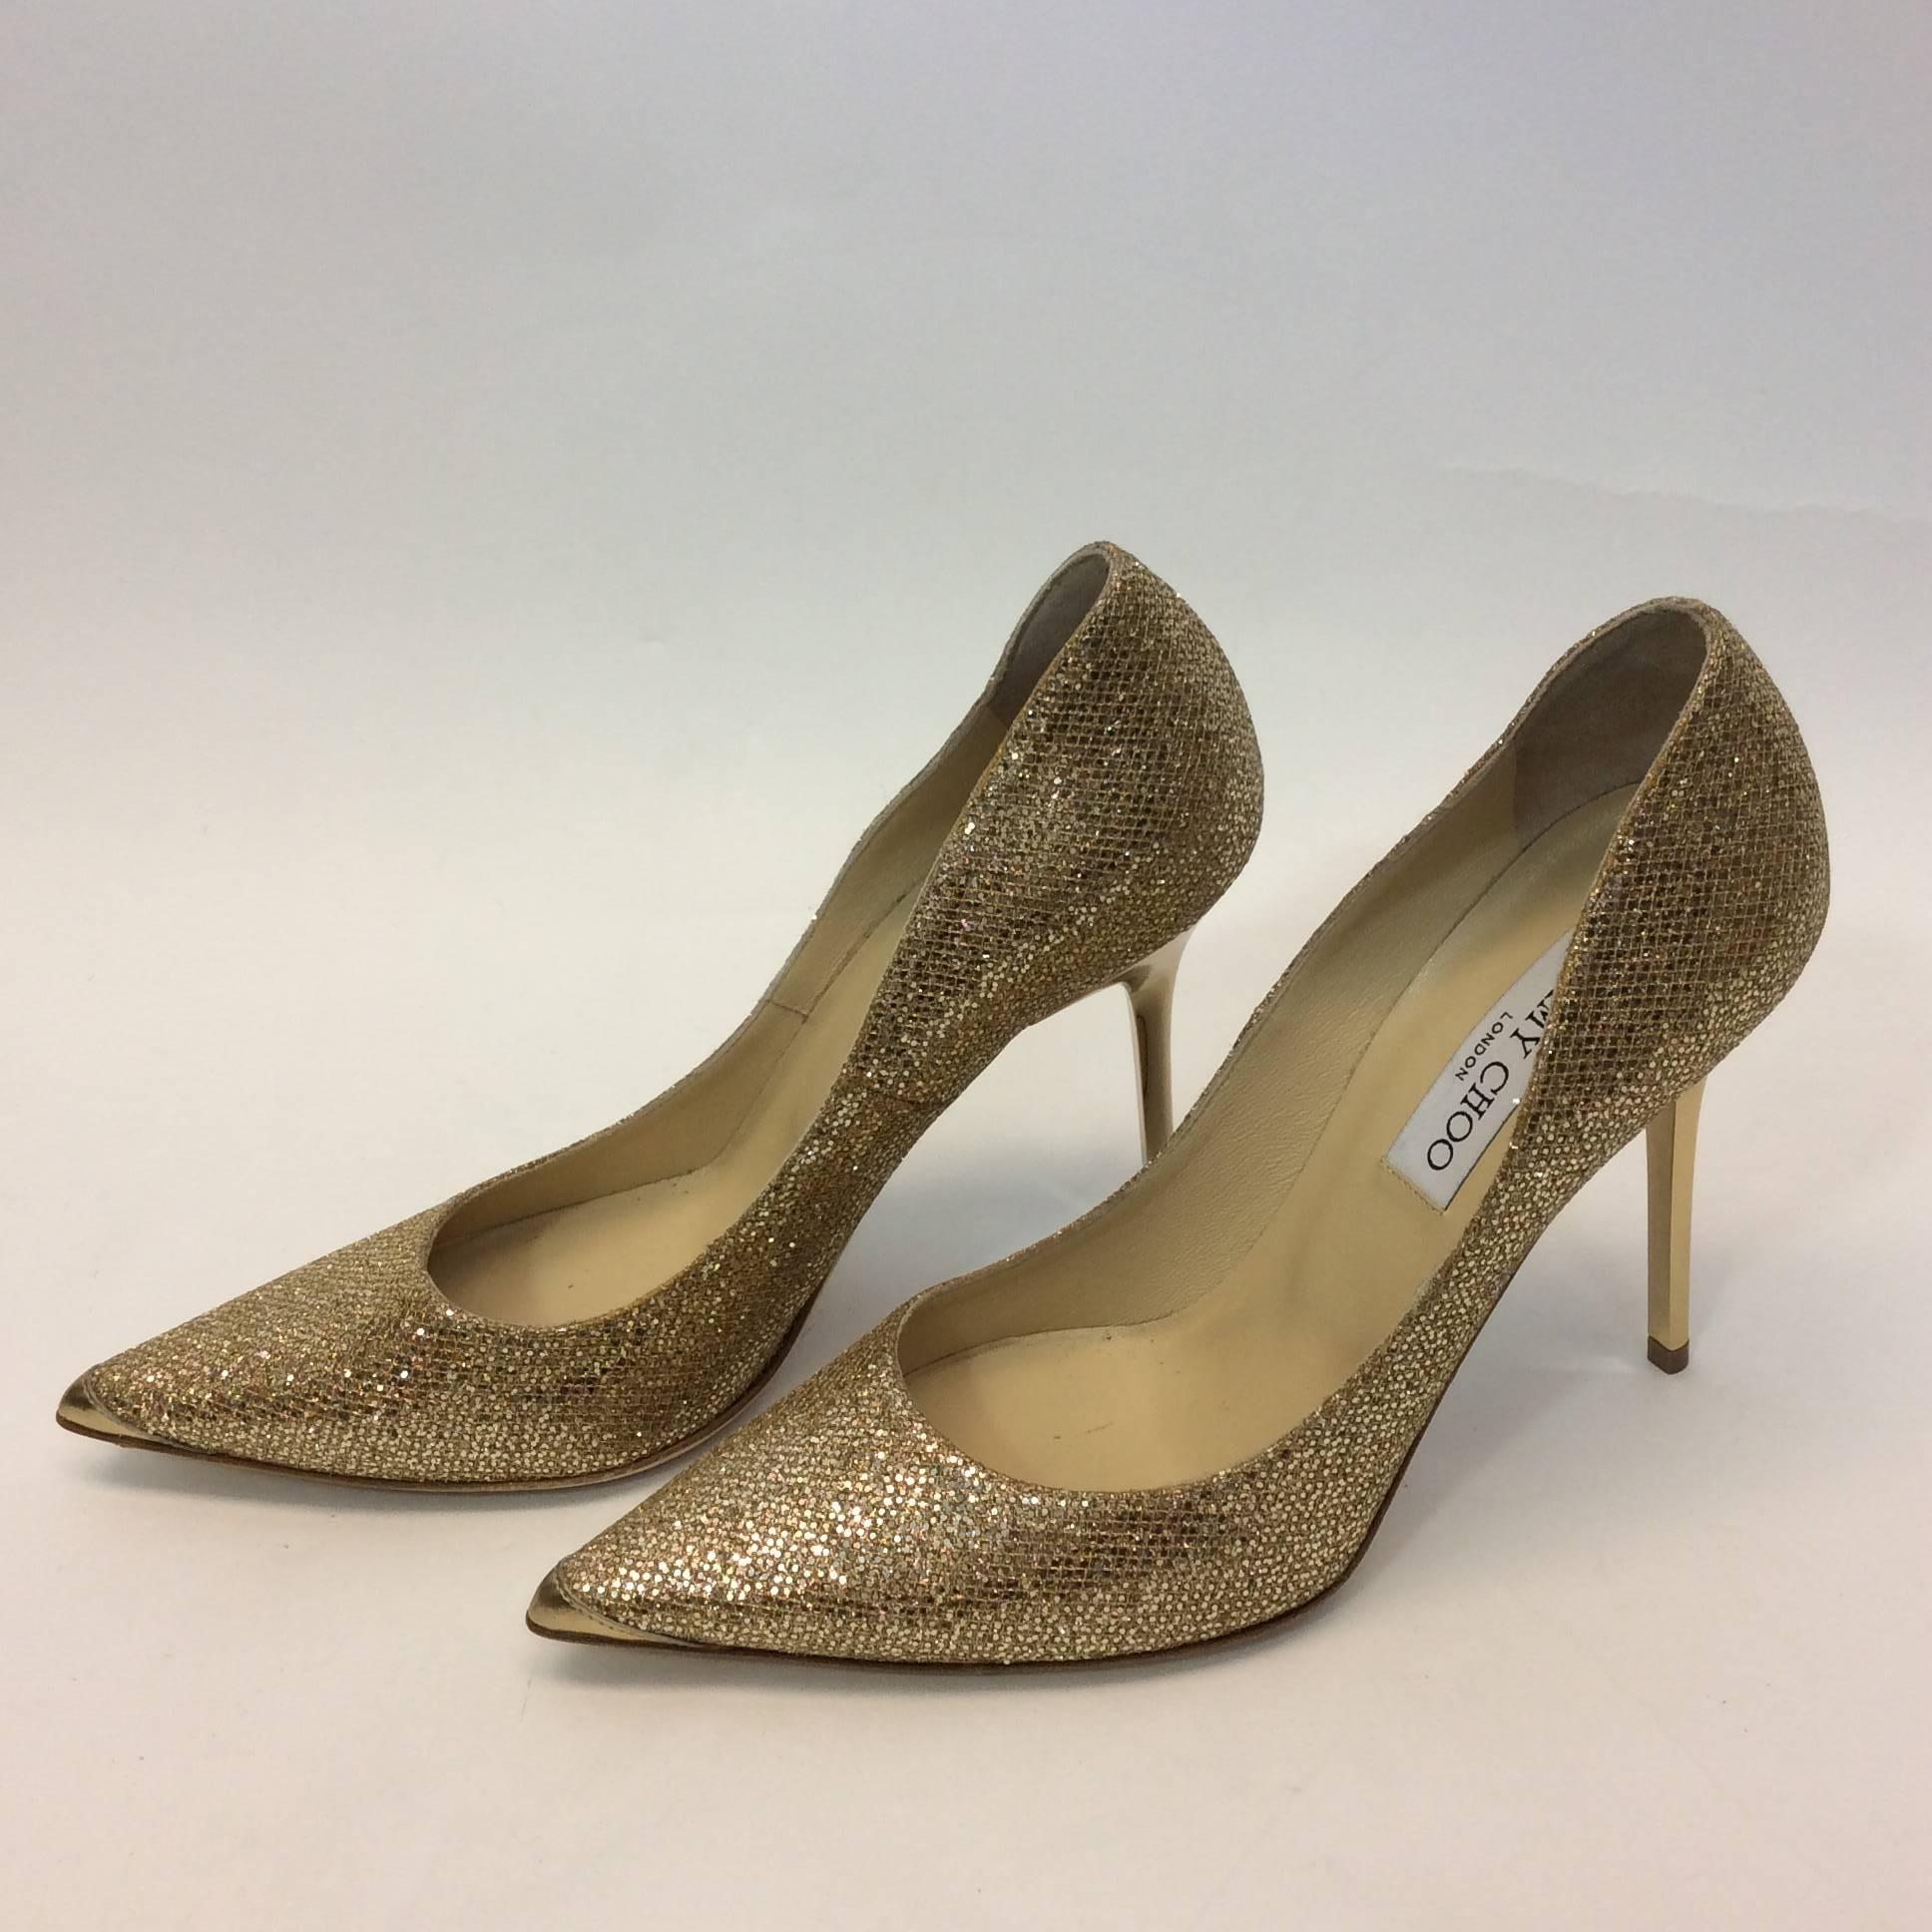 Jimmy Choo Gold Sequined Pump In Excellent Condition For Sale In Narberth, PA